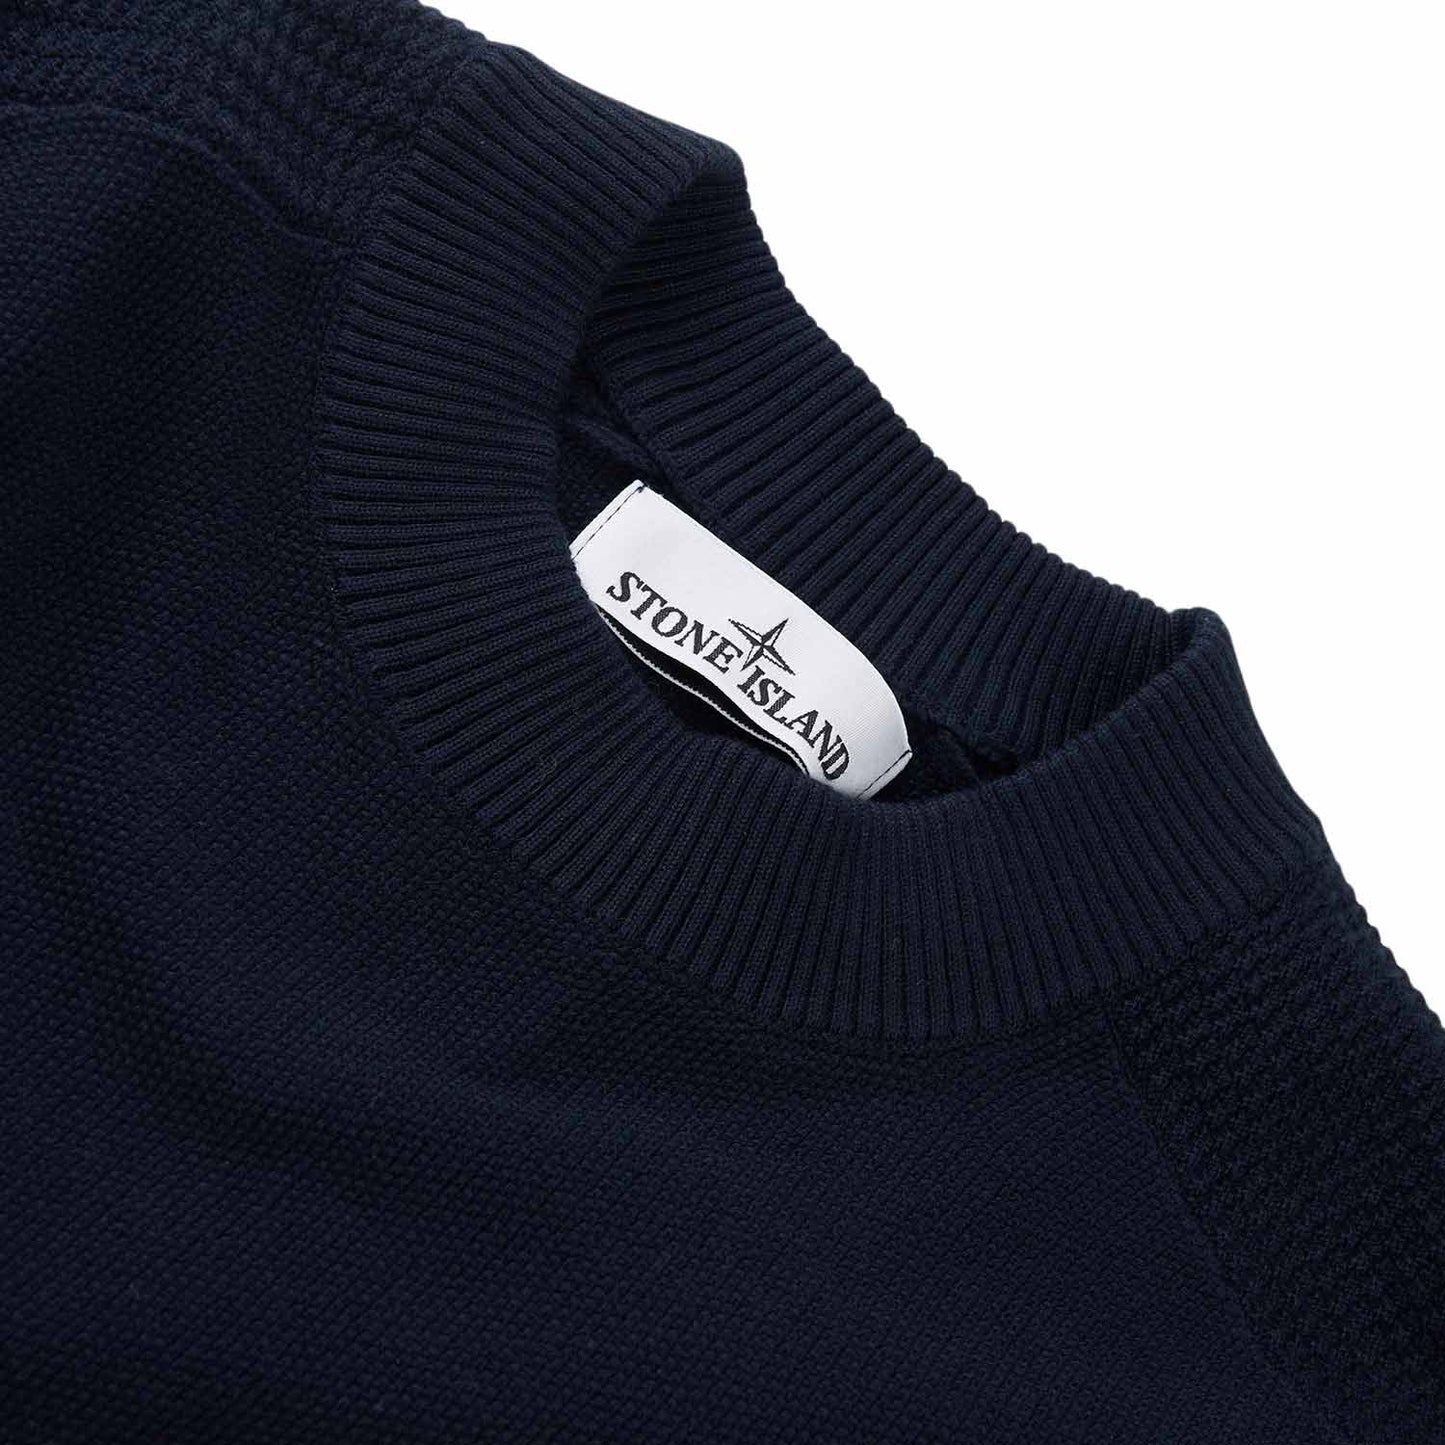 stone island knit pullover (navy blue)